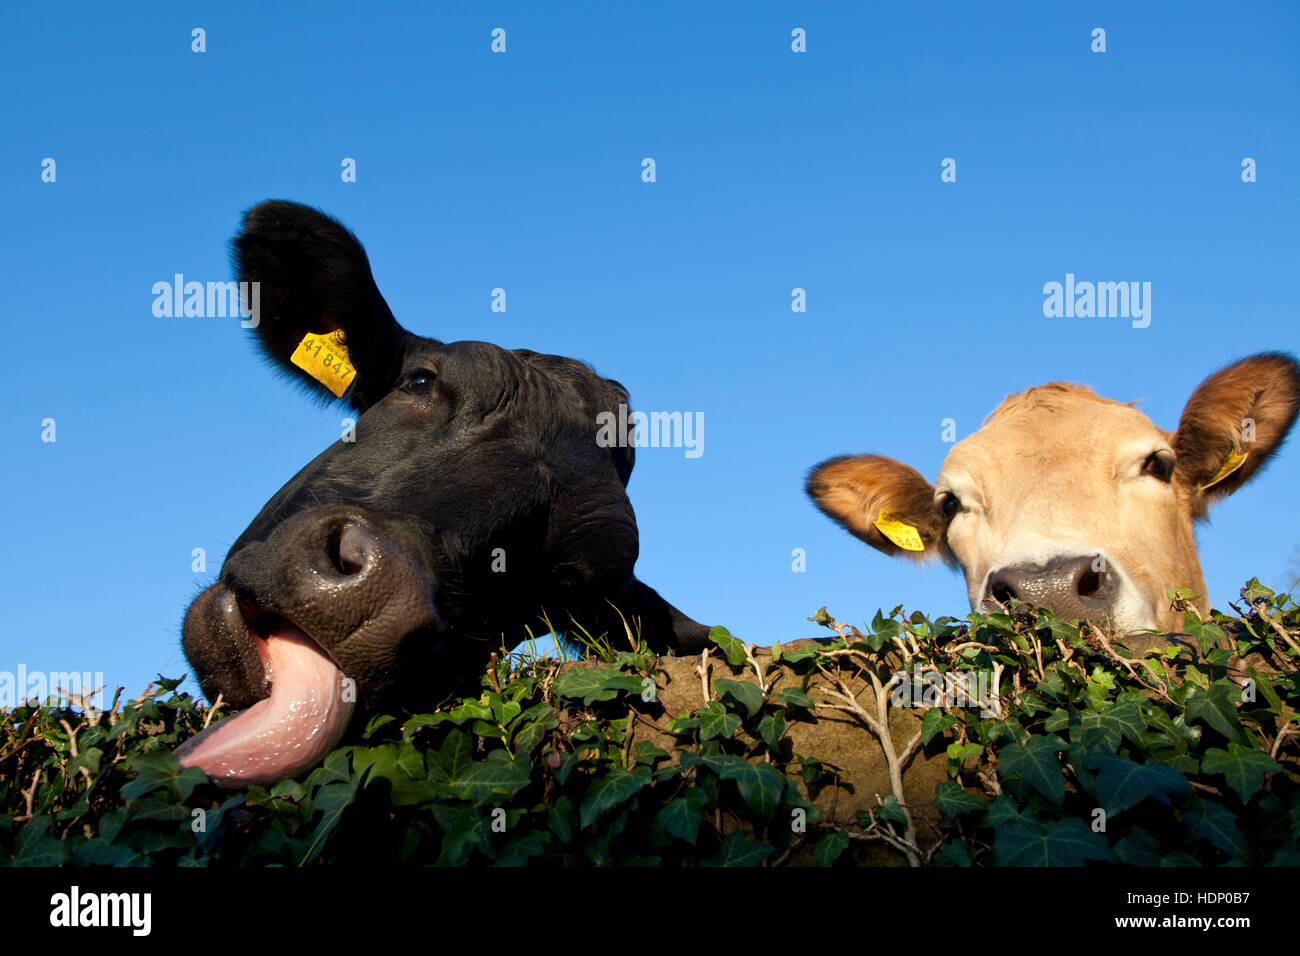 Europe, Germany, North Rhine-Westphalia, Herdecke, cows are looking over an ivy covered wal, the left cow is eating the ivy leaves. Stock Photo